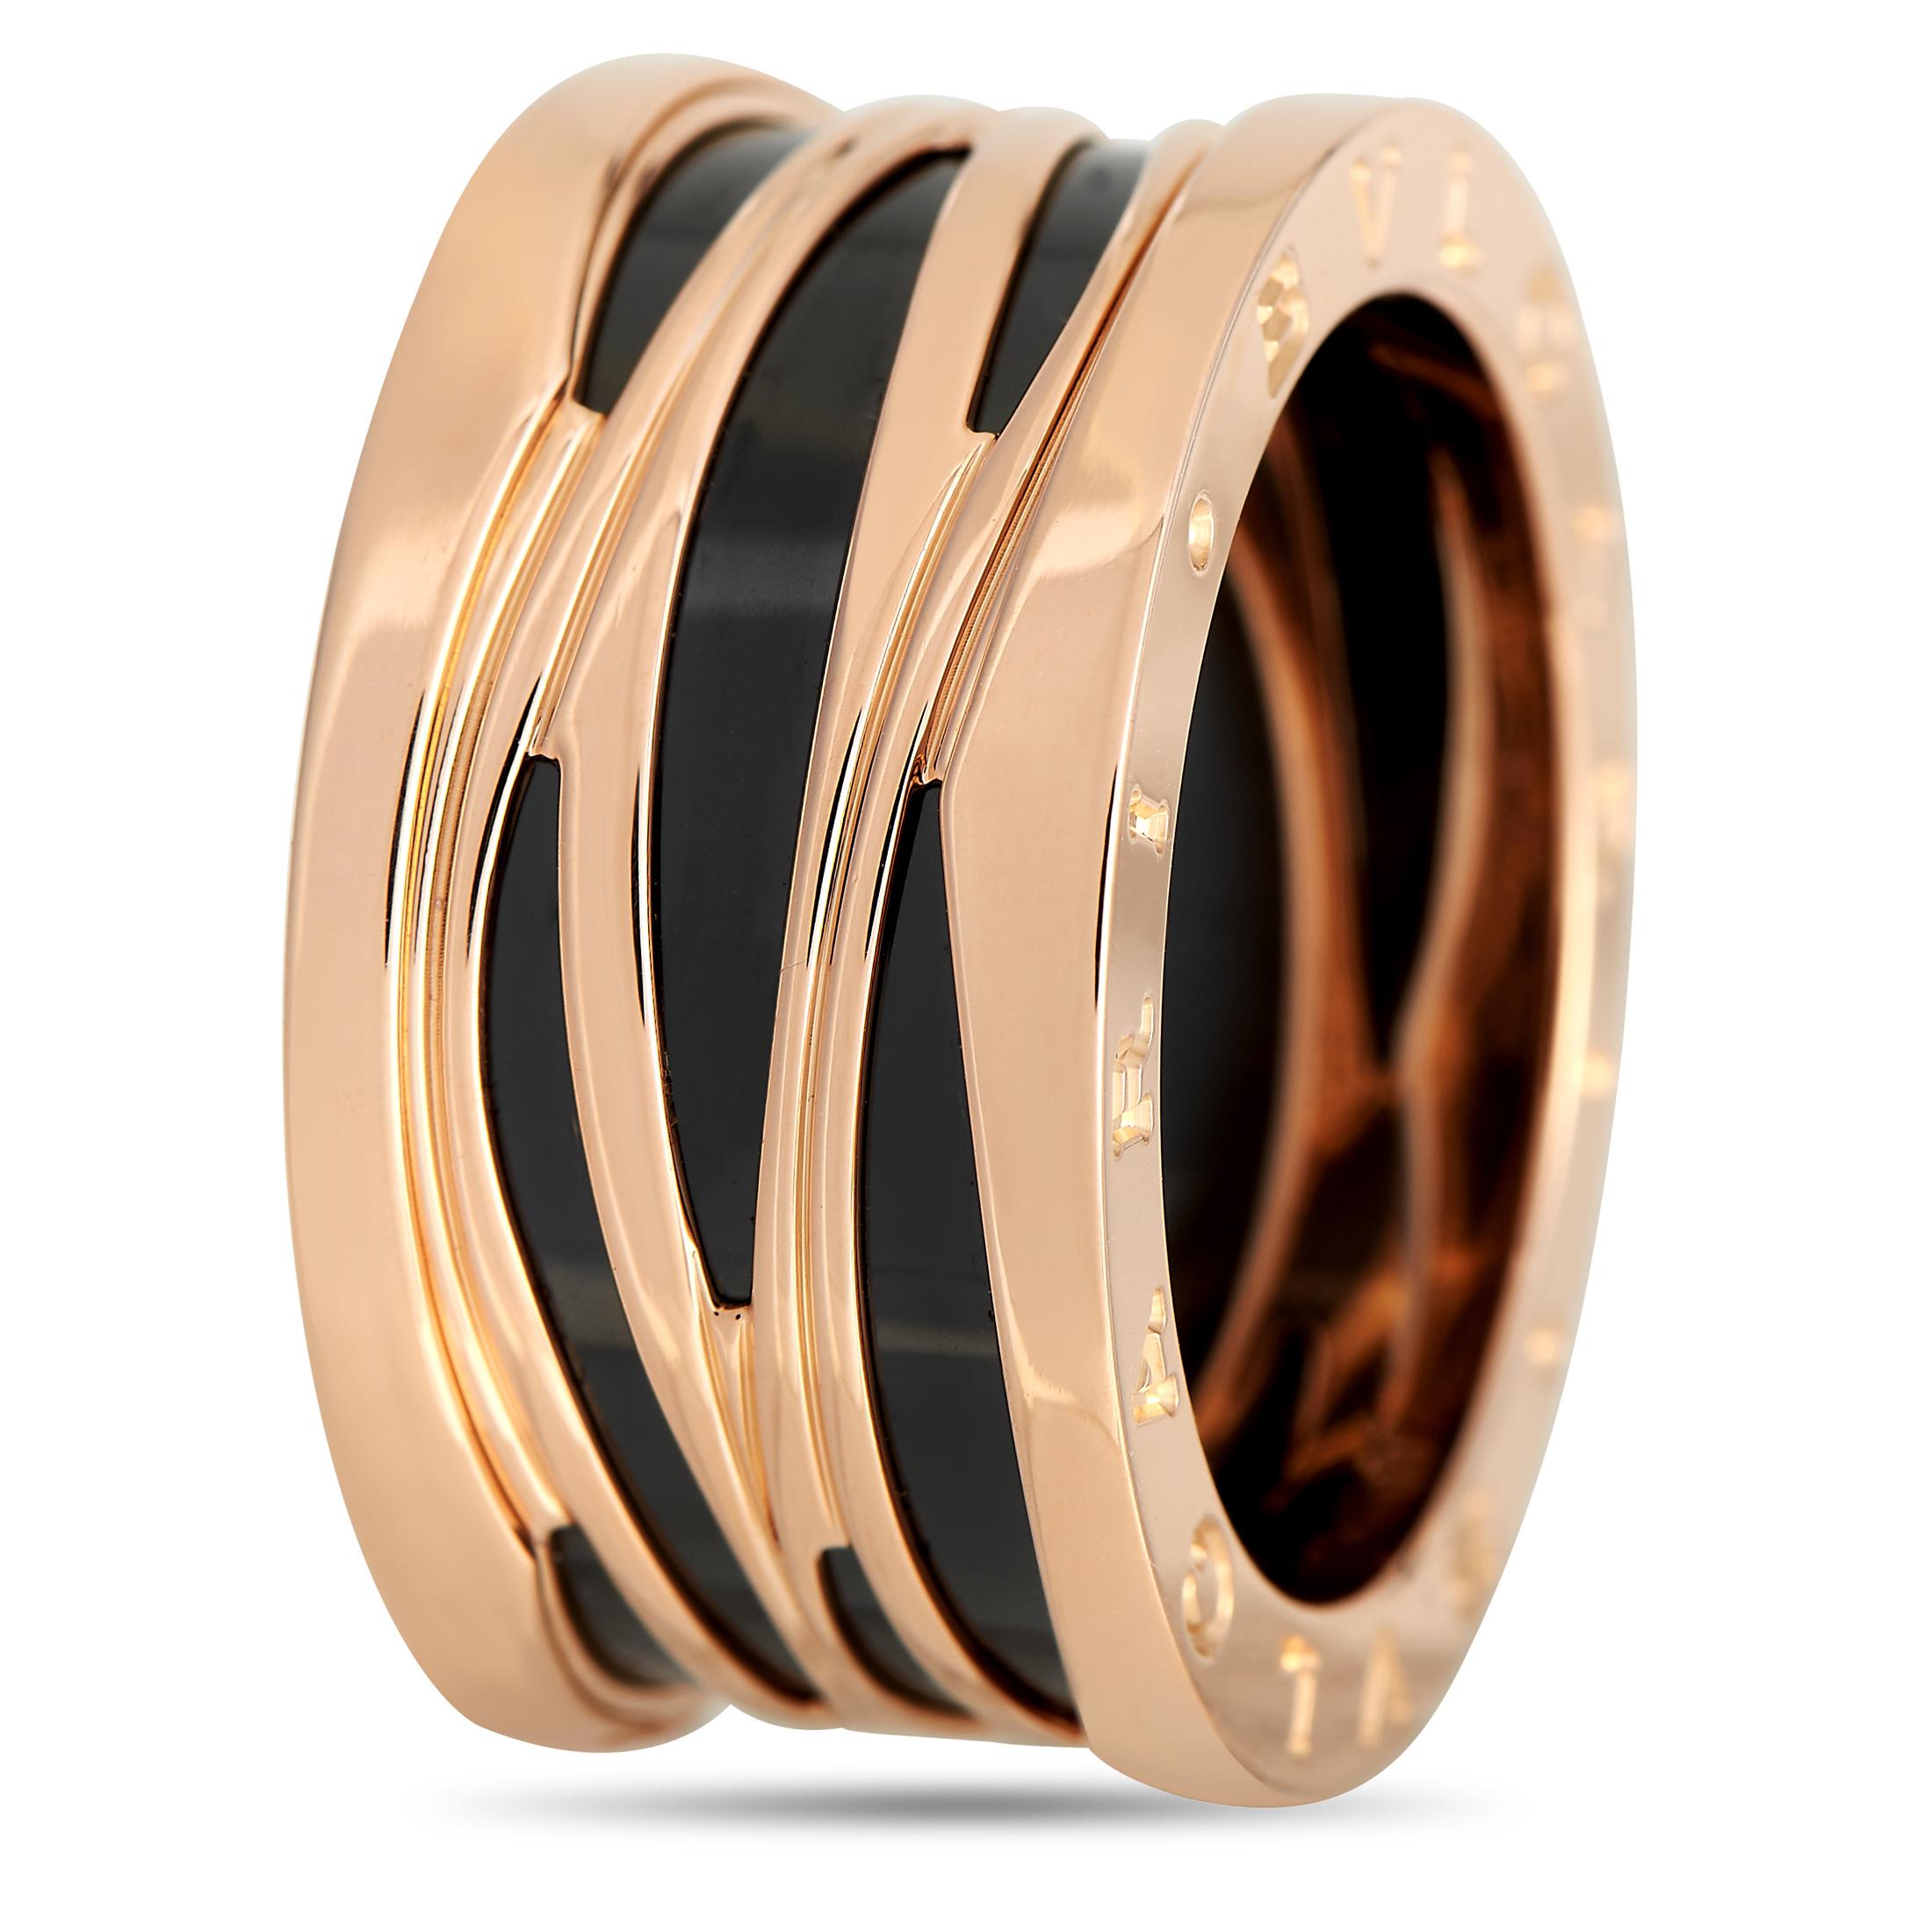 Black ceramic accents add texture, depth, and visual impact to this sophisticated Bvlgari B.zero1 band ring. Crafted from opulent 18K rose gold, each end is elevated by the brands iconic signature. This elegant accessory measures 12mm wide.This